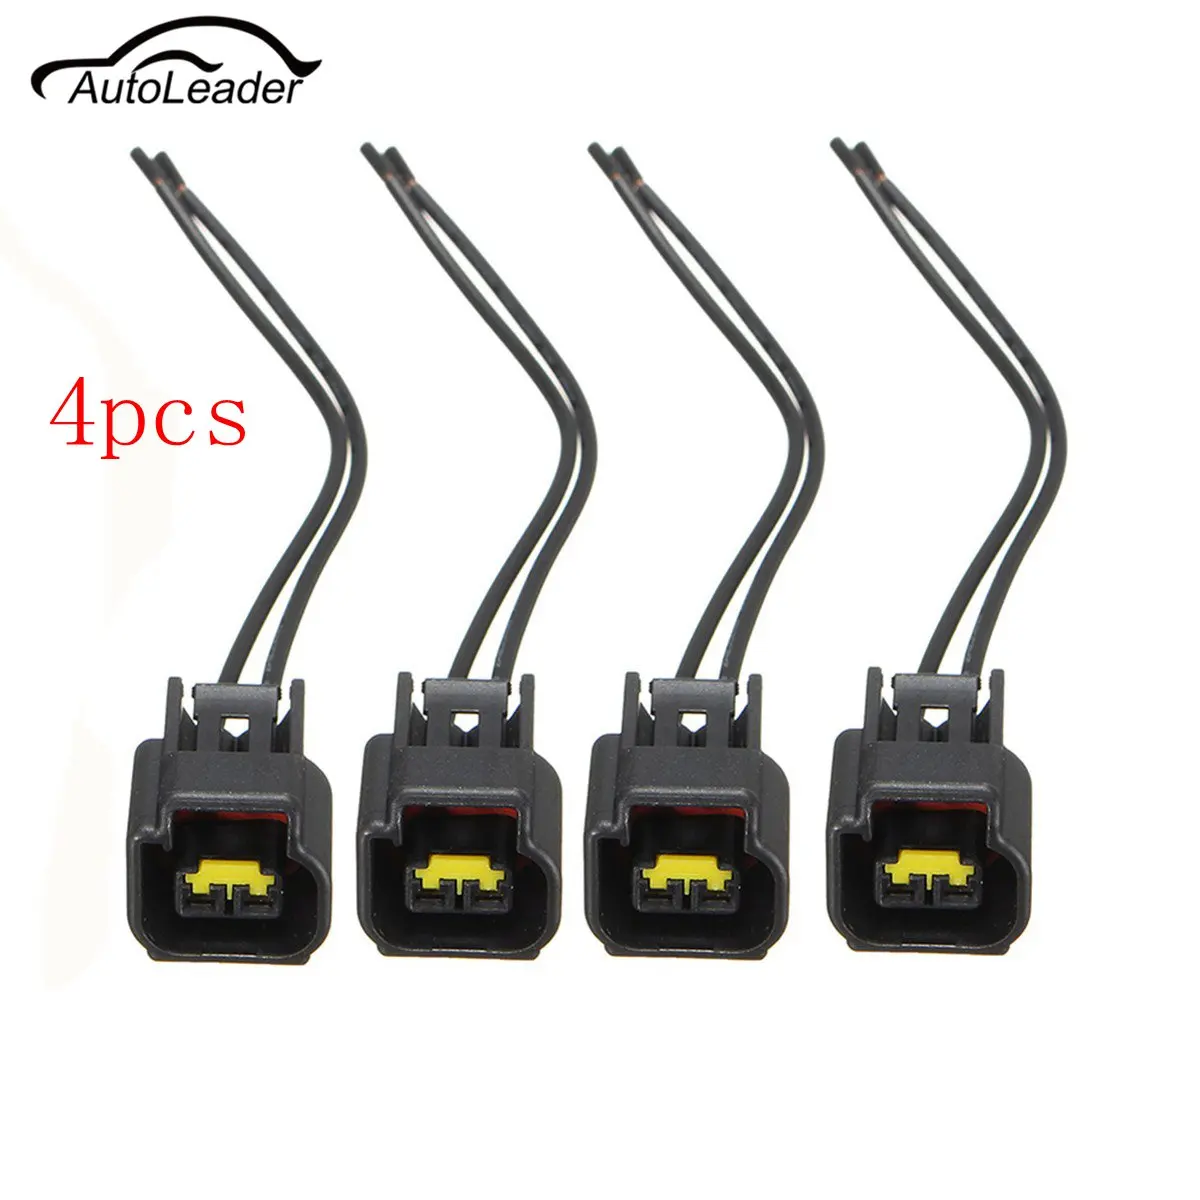 8 set Fit For Modular Ford Ignition Coil Connector for 4.6L 5.4L Triton Motors 